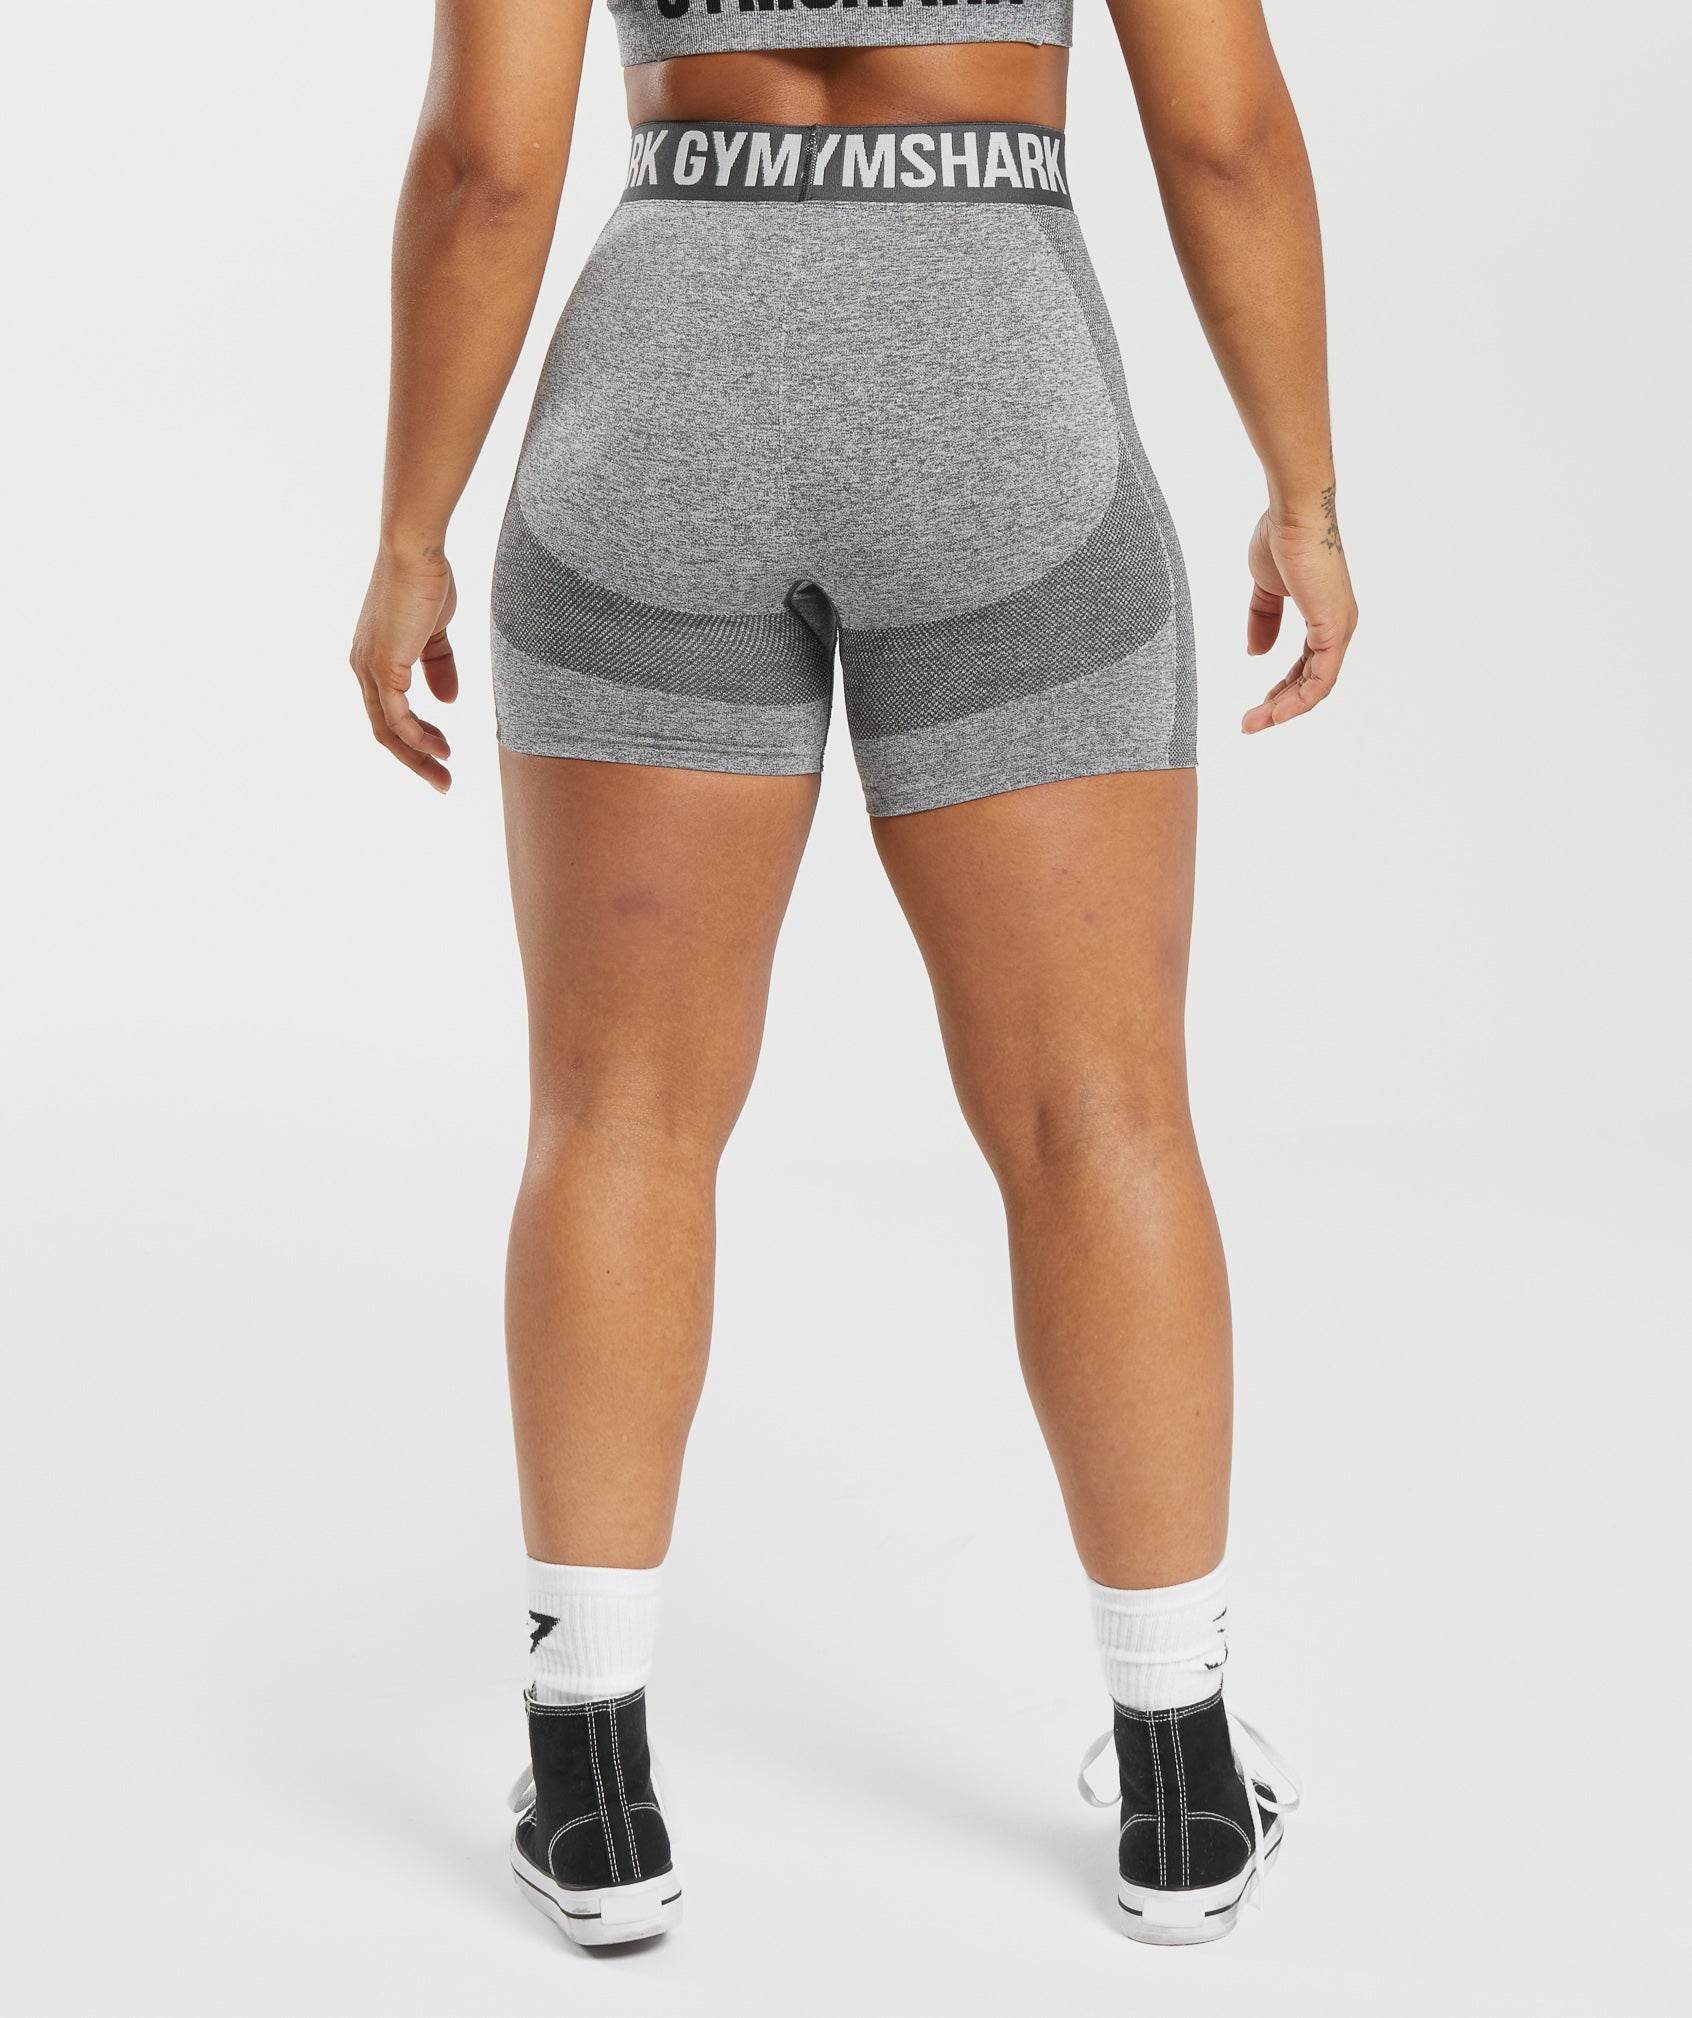 Gym & Workout Shorts, Compression Shorts, Fitness Shorts